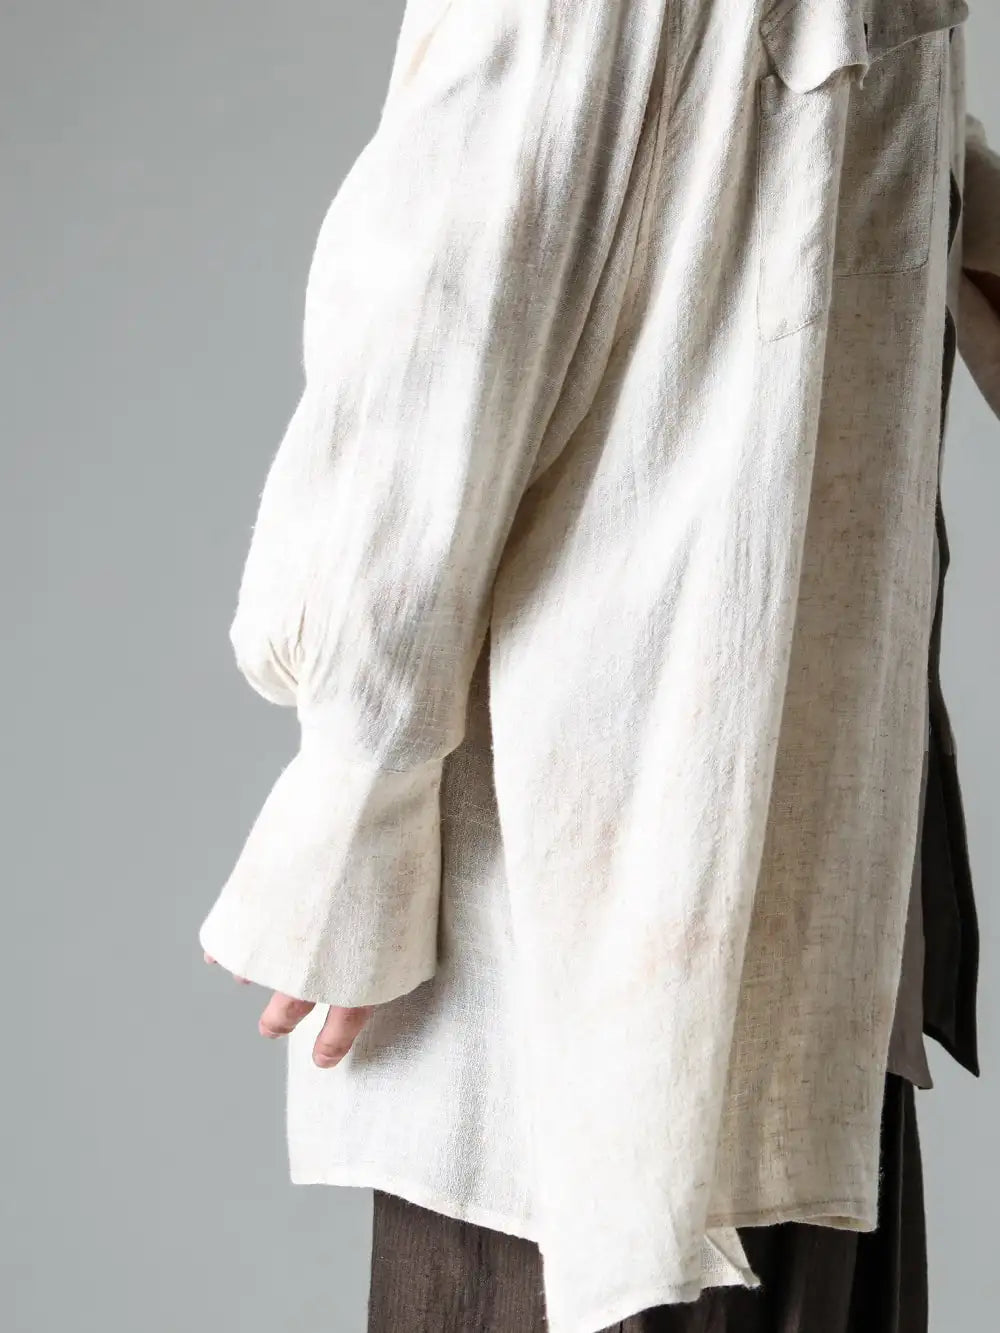 Peng Tai DEVOA 24SS  - Oversized shirts tailored with a neutral atmosphere - PTS24M06-2 Hand Dye Double Pocket Oversized Shirt SHE-CTKM Shirt Cotton 2-004